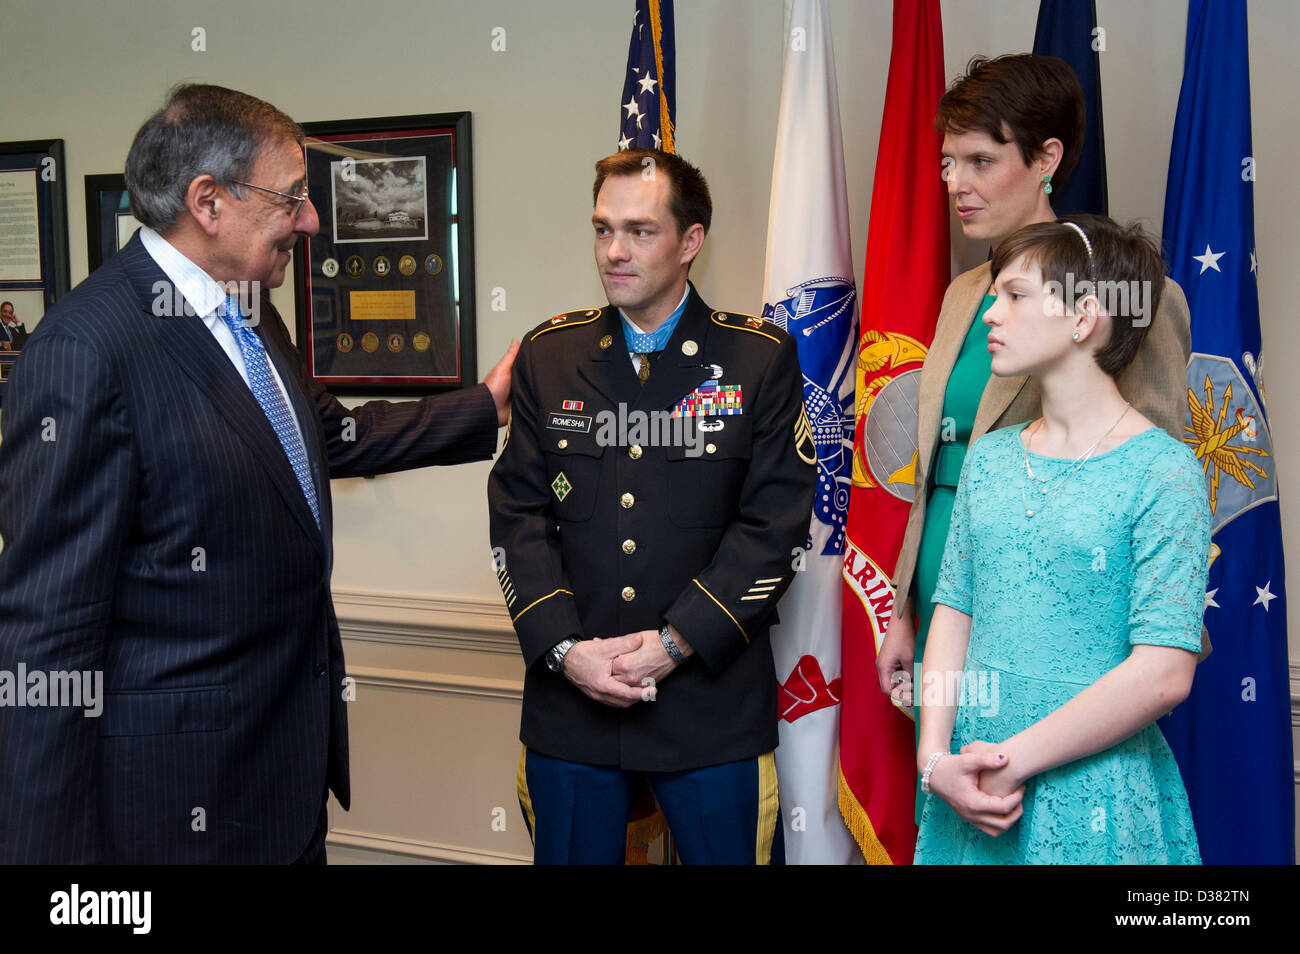 Pentagon, Arlington, Virginia. 12th February 2013. US Secretary of Defense Leon Panetta welcomes Army Staff Sergeant Clinton Romesha and his family at the Pentagon, February 12, 2013 in Arlington, VA. Romesha was presented the Medal of Honor yesterday at the White House for heroism in combat in Afghanistan.Credit: DOD Photo / Alamy Live News Stock Photo